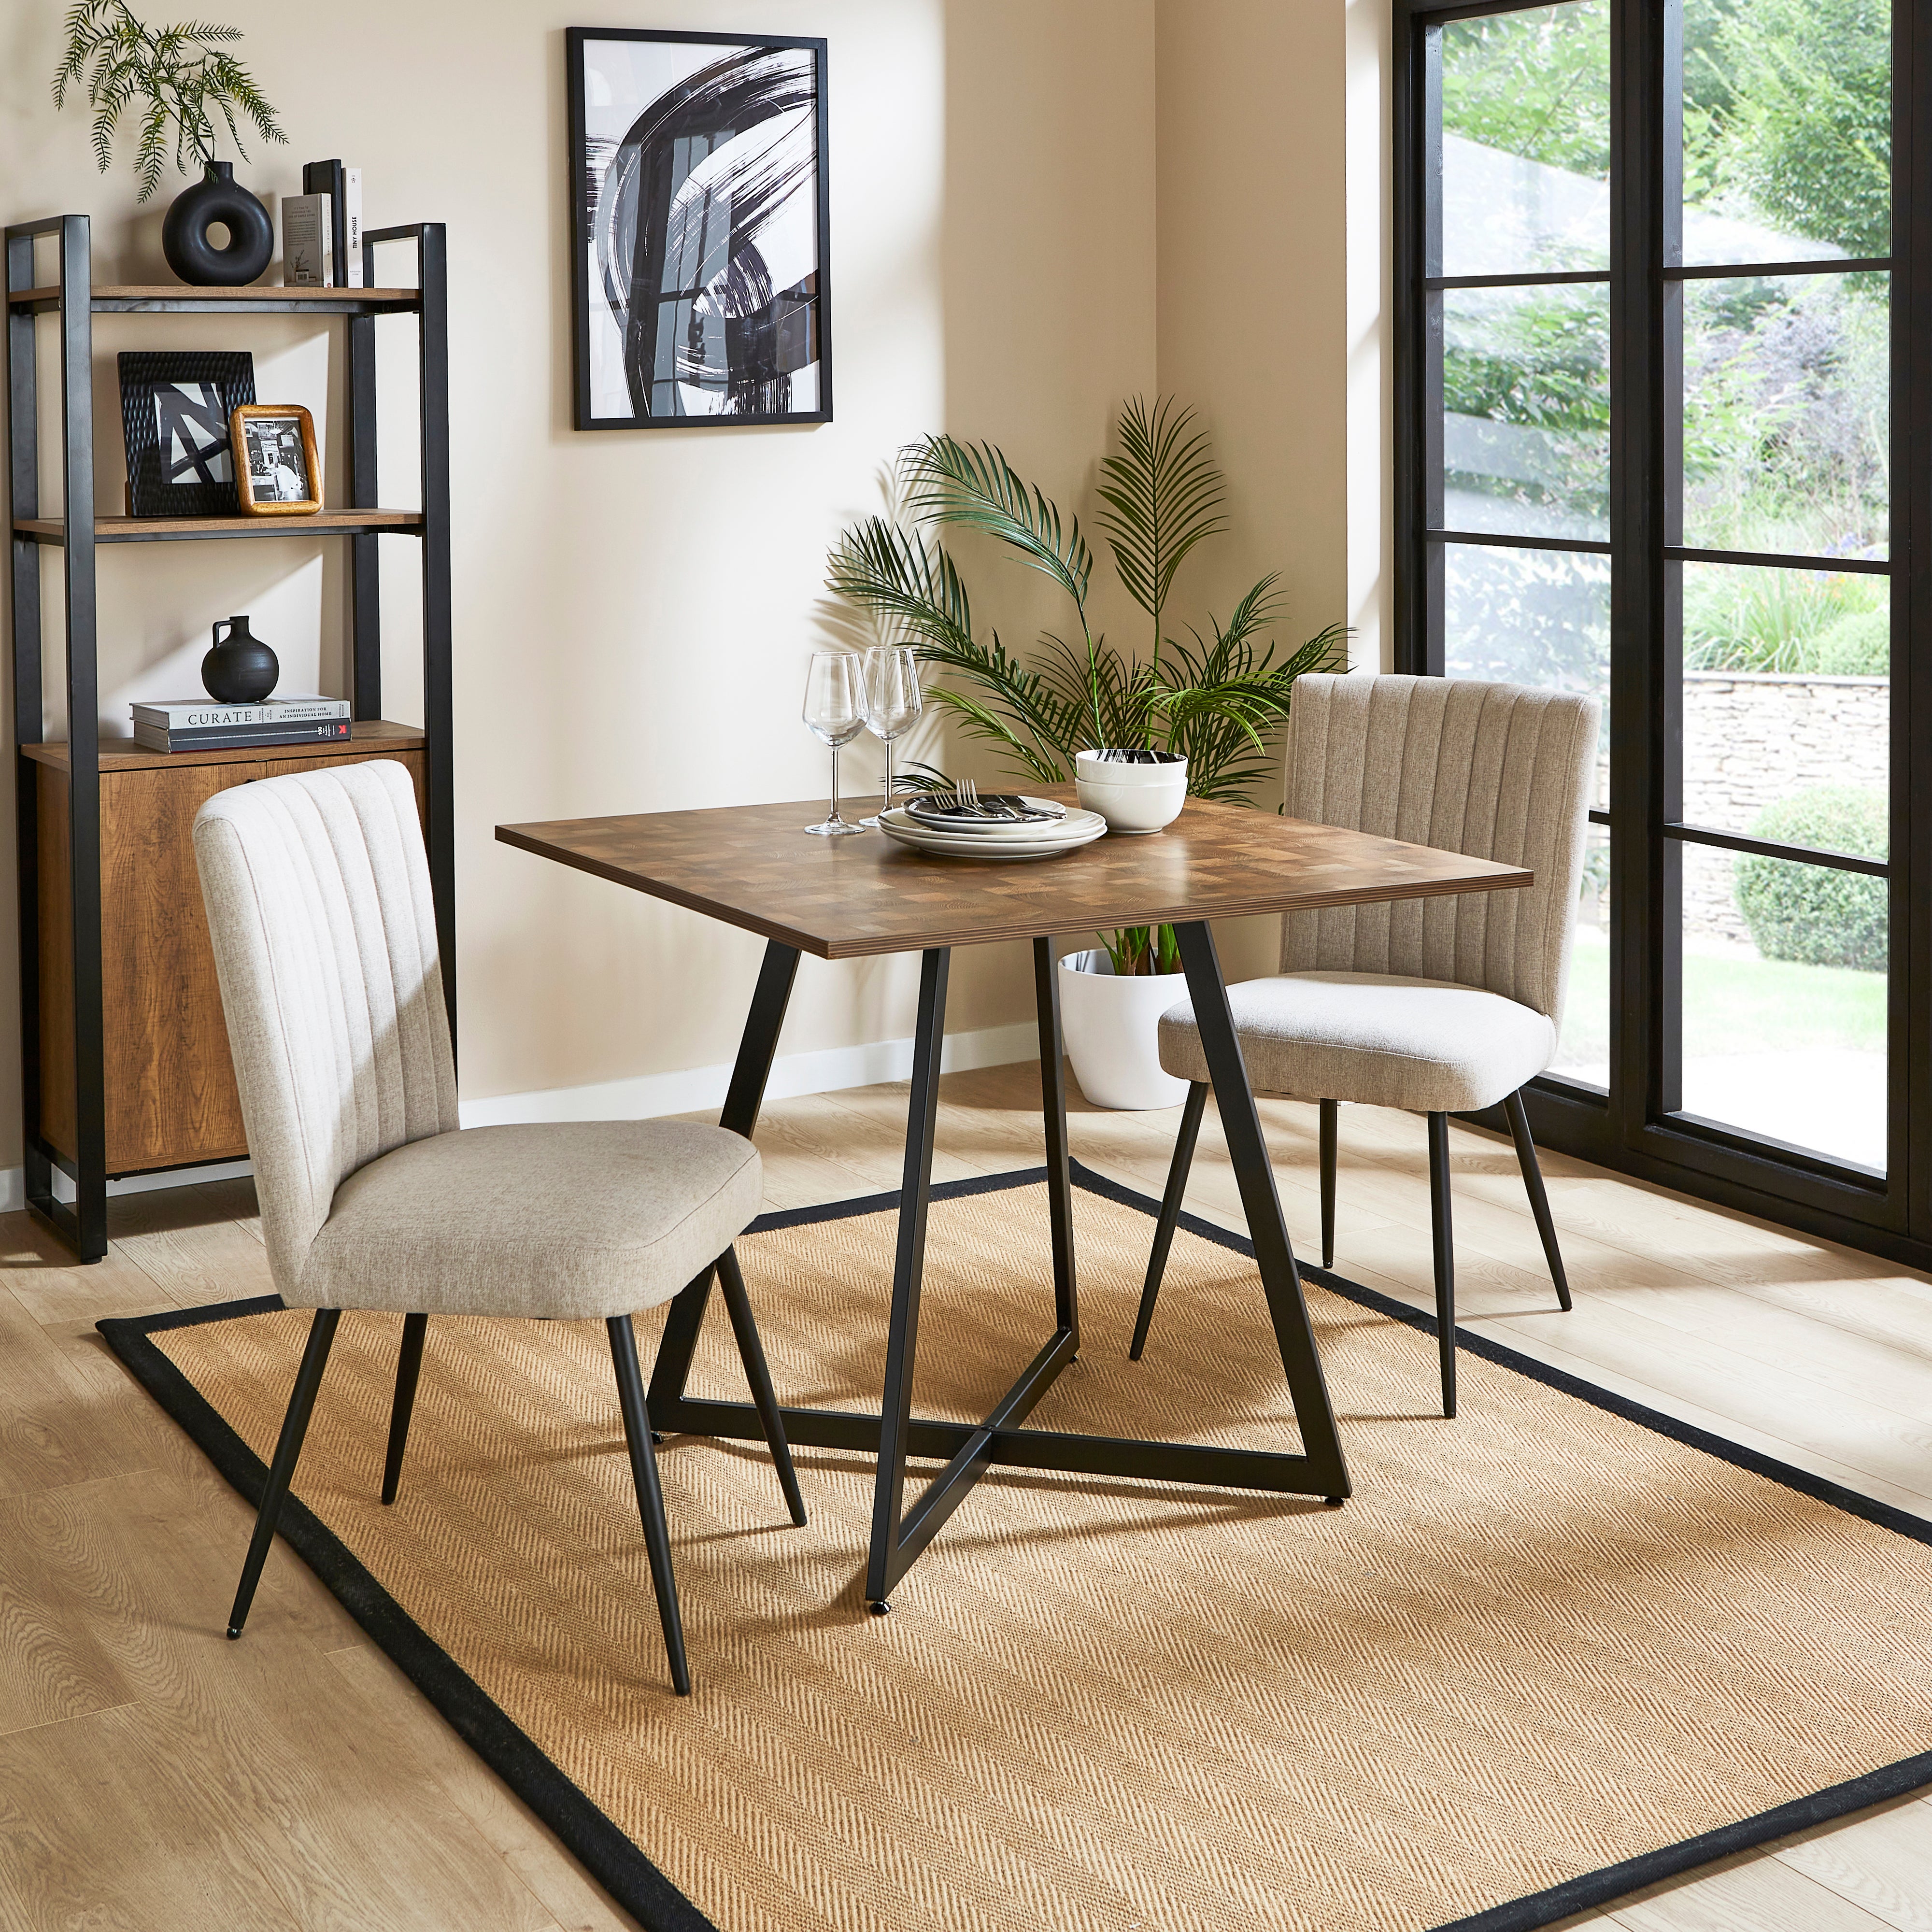 Brayden 4 Seater Square Dining Table Parquet Effect Brown